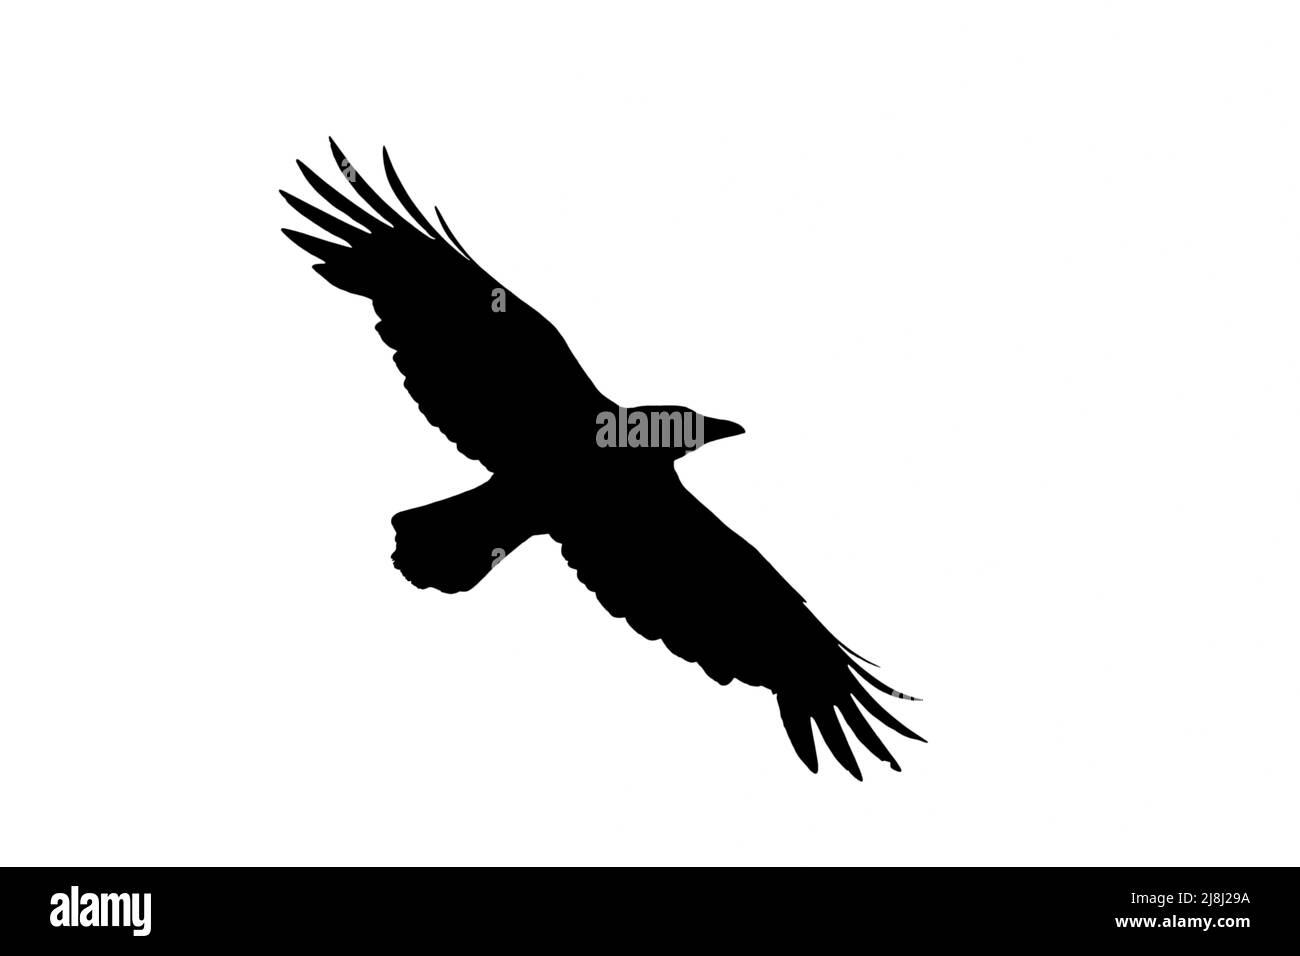 Silhouette of carrion crow (Corvus corone) in flight outlined against white background to show wings, head and tail shapes Stock Photo